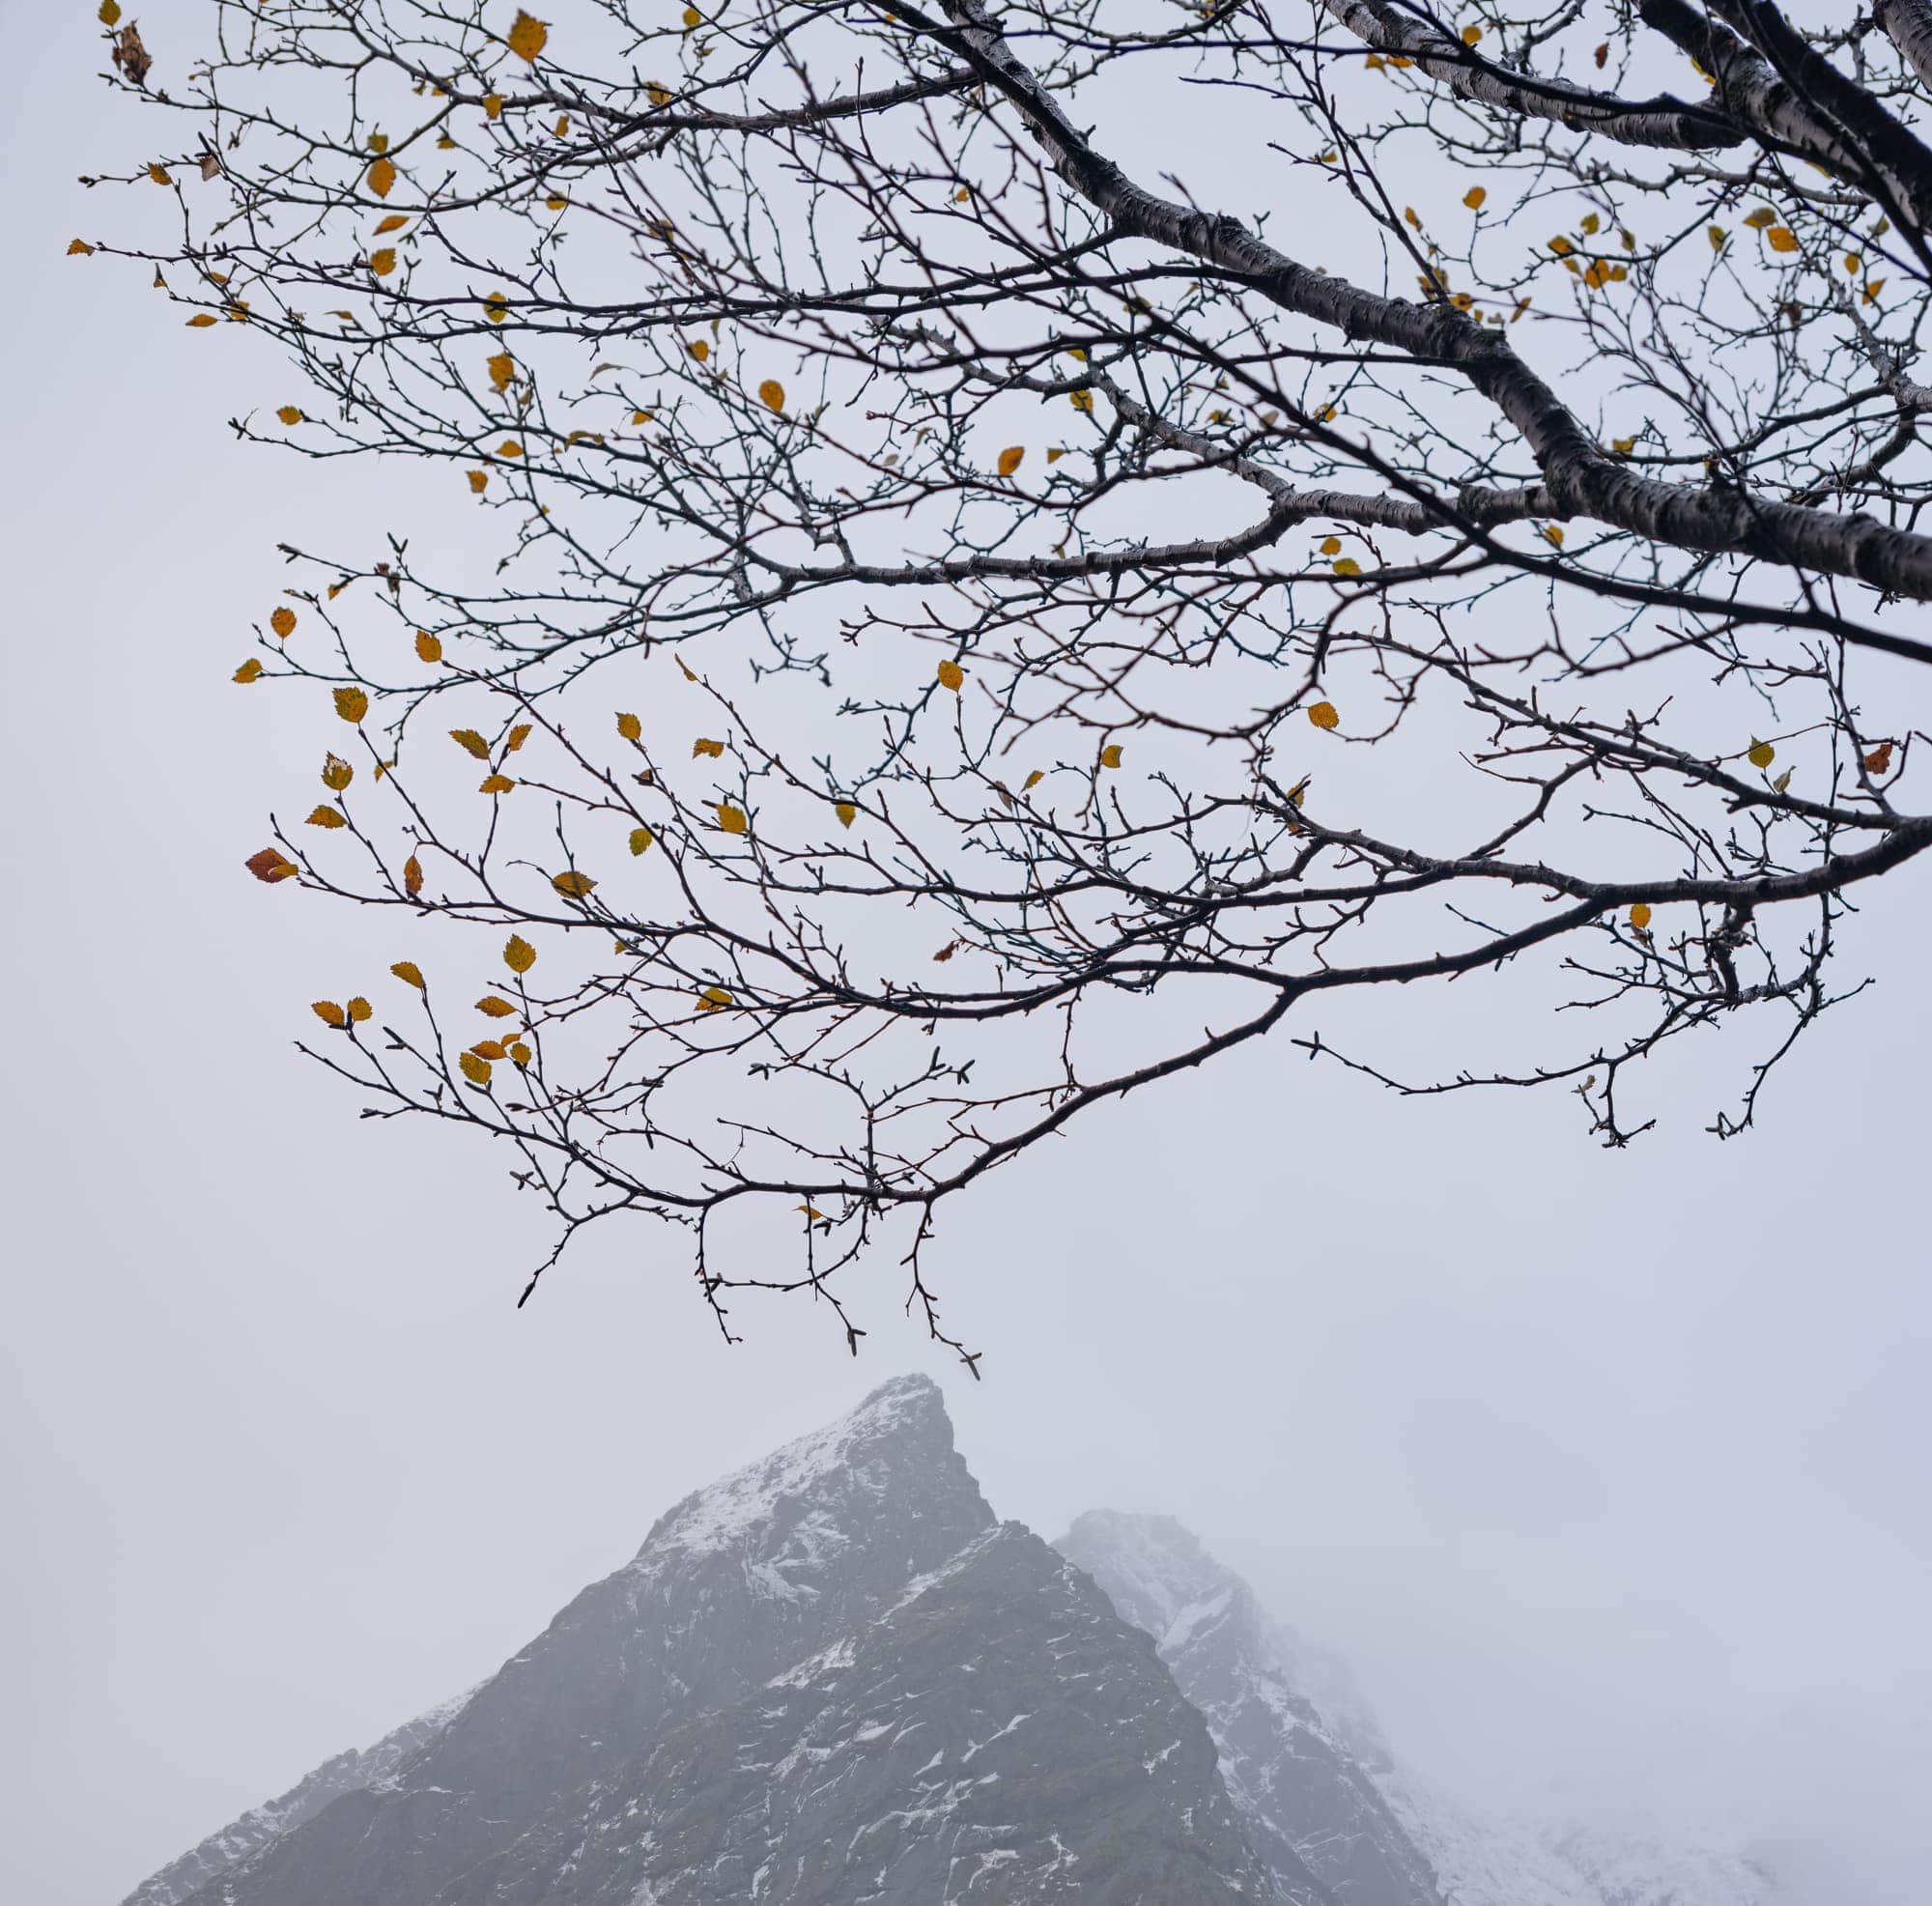 Bare tree branches with a few yellow leaves contrasted against the foggy silhouette of a mountain peak in Lofoten.